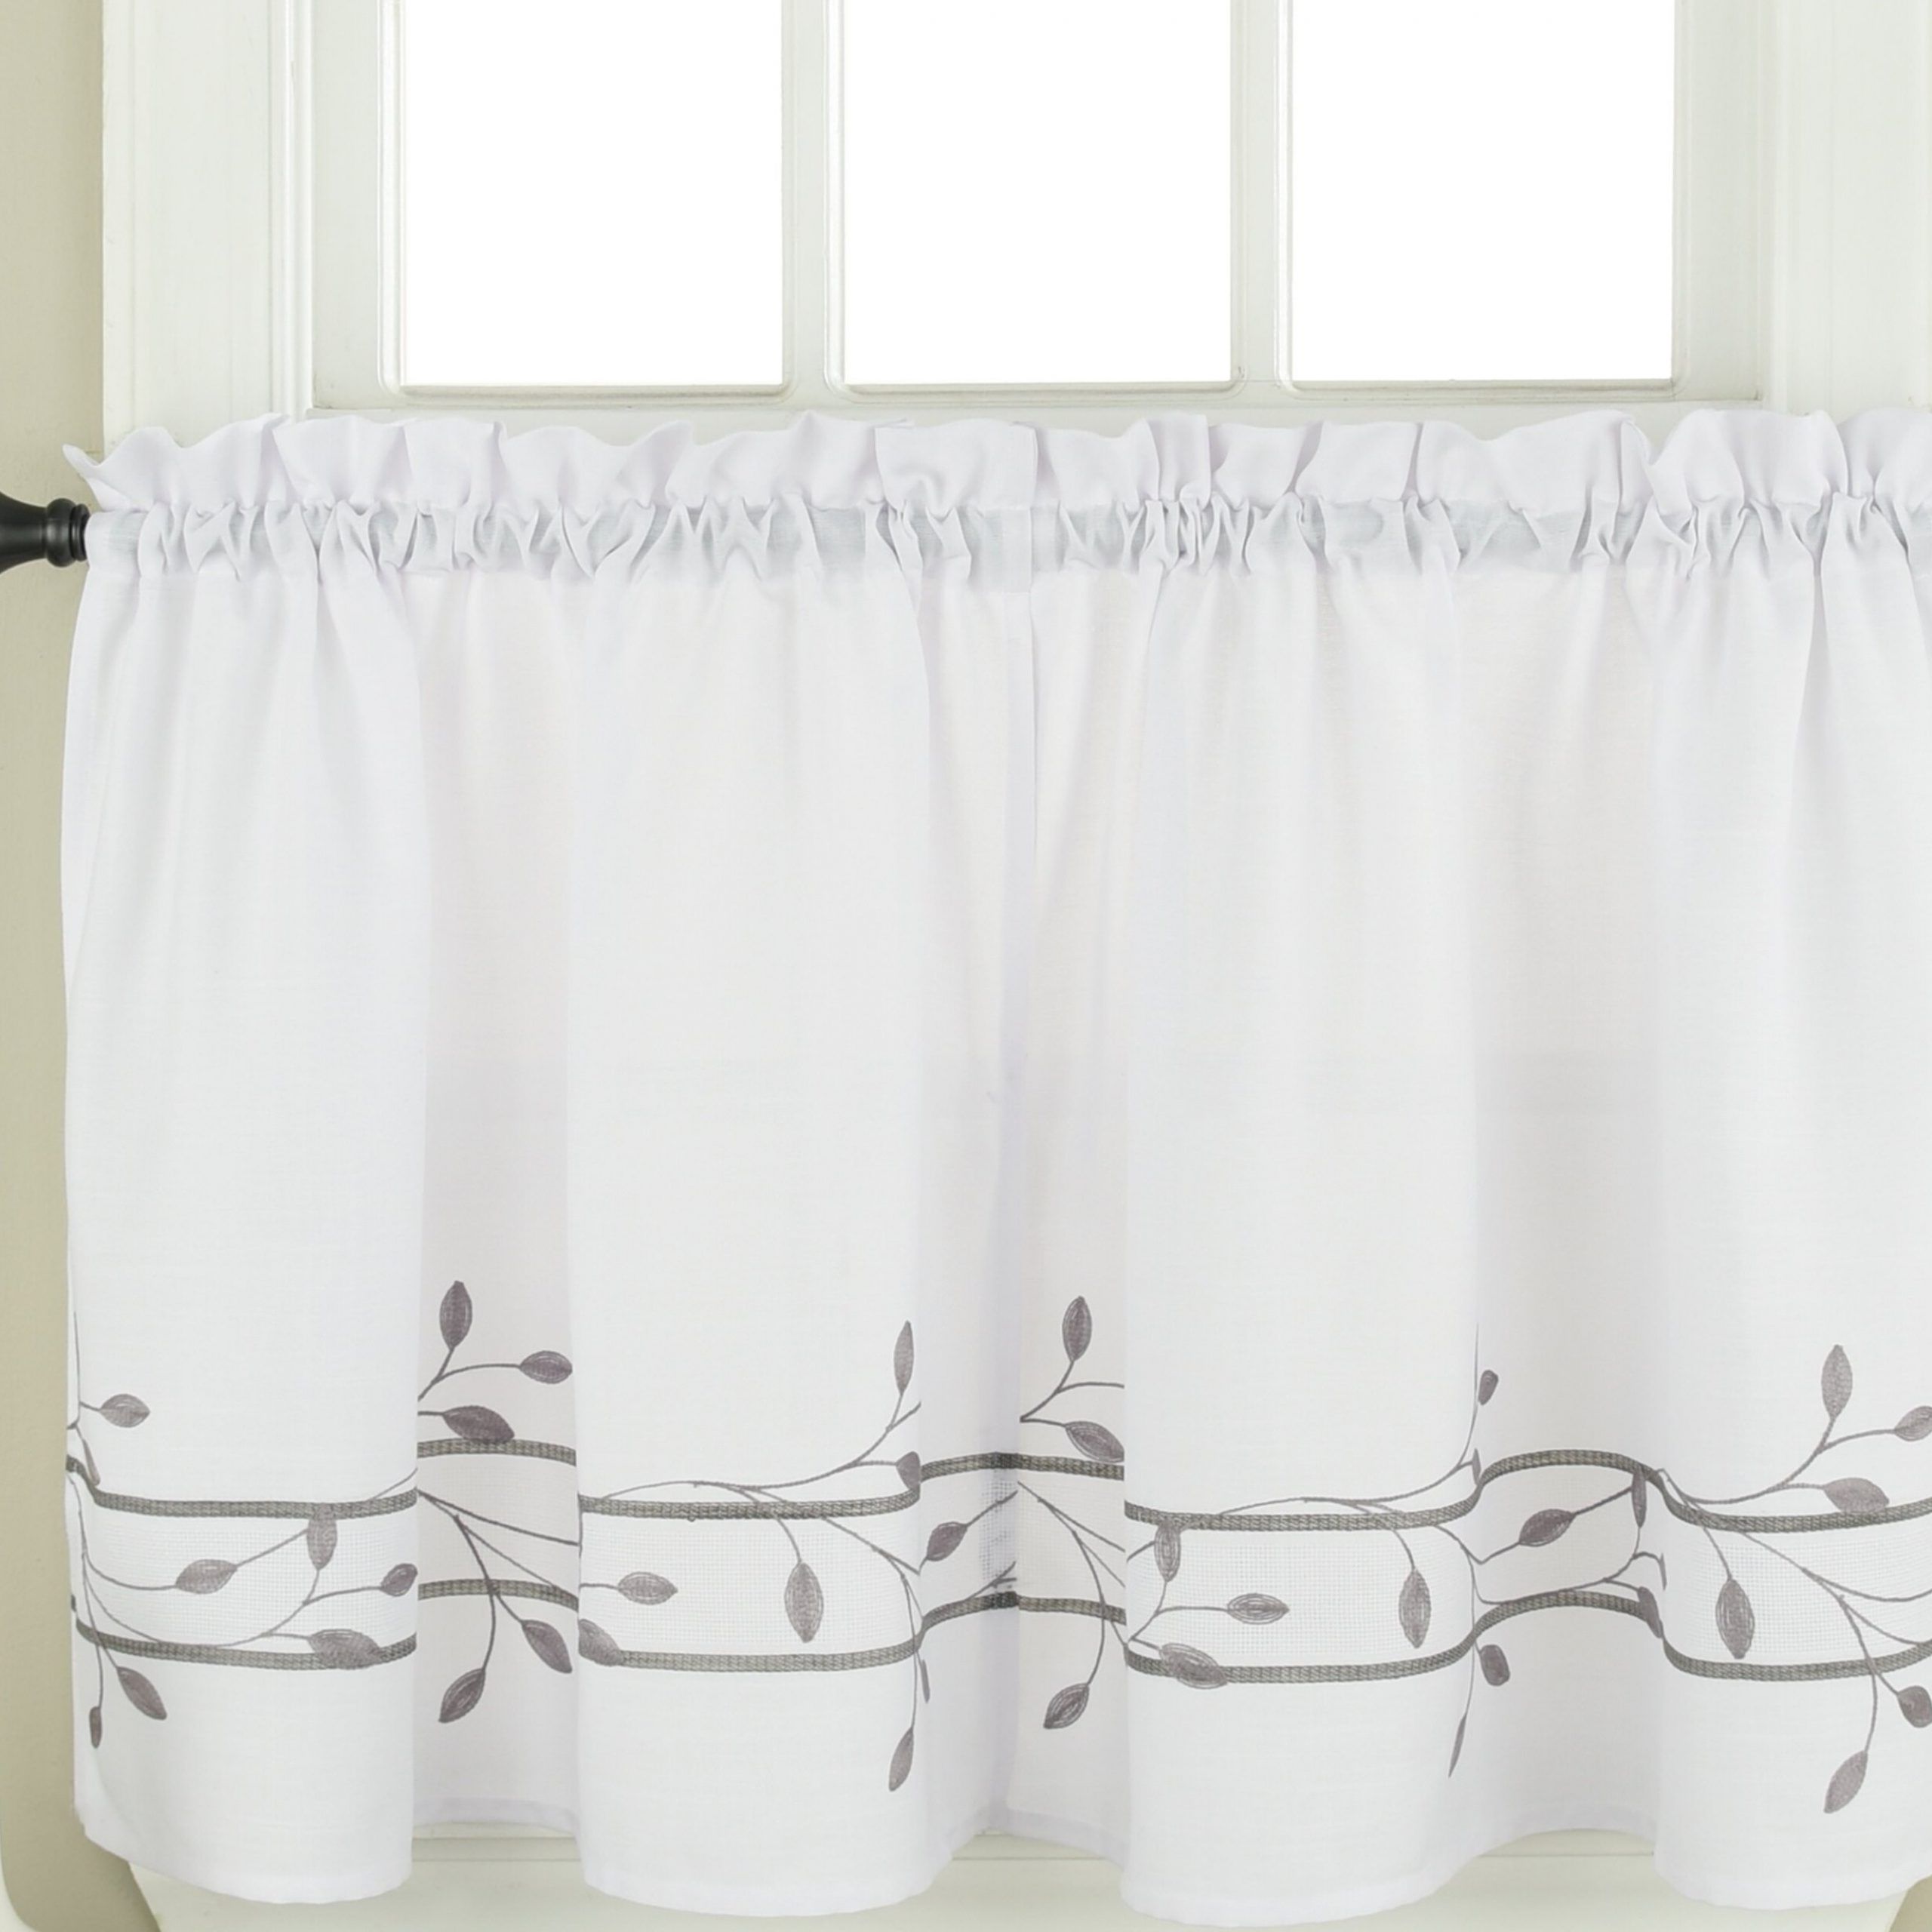 Serene Rod Pocket Kitchen Tier Sets In Most Up To Date Bouck Embroidered Tier Cafe Curtain (View 17 of 20)